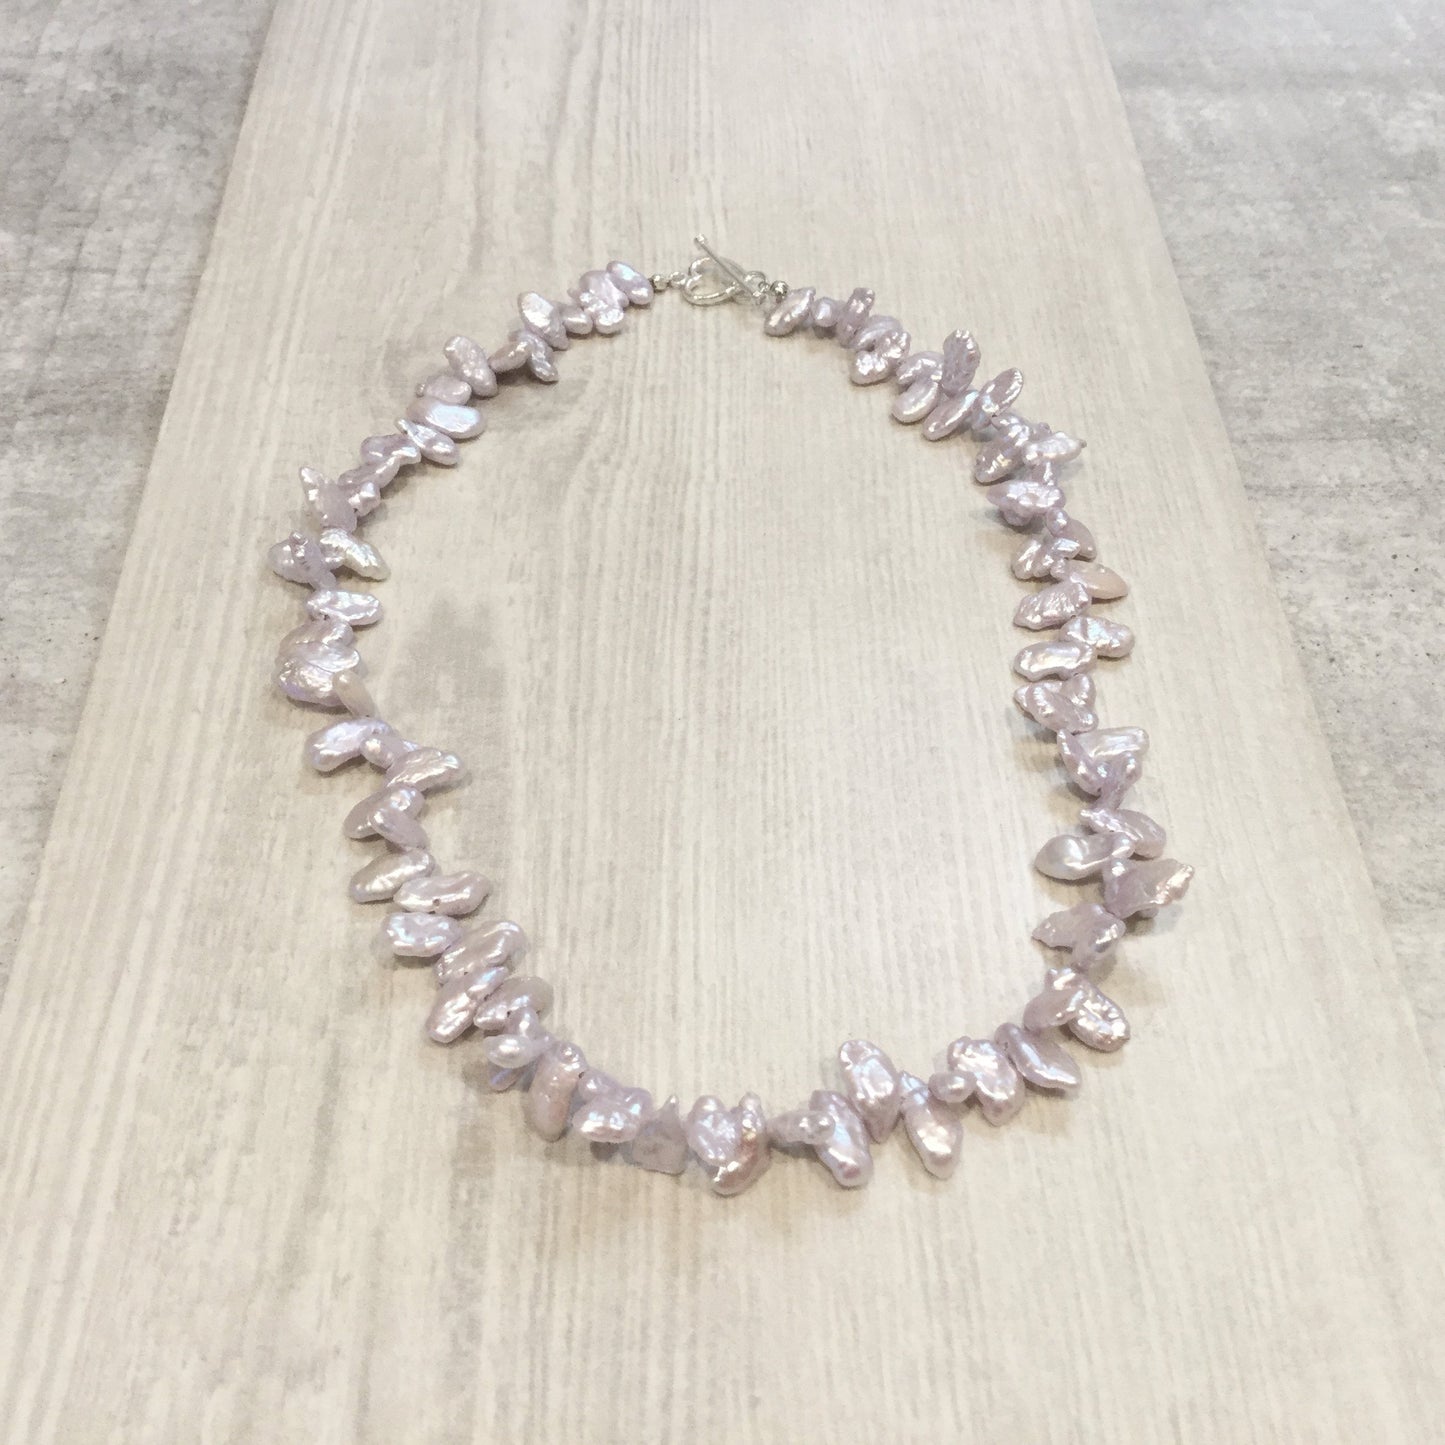 Lilac freshwater cultured Keshi pearl necklace